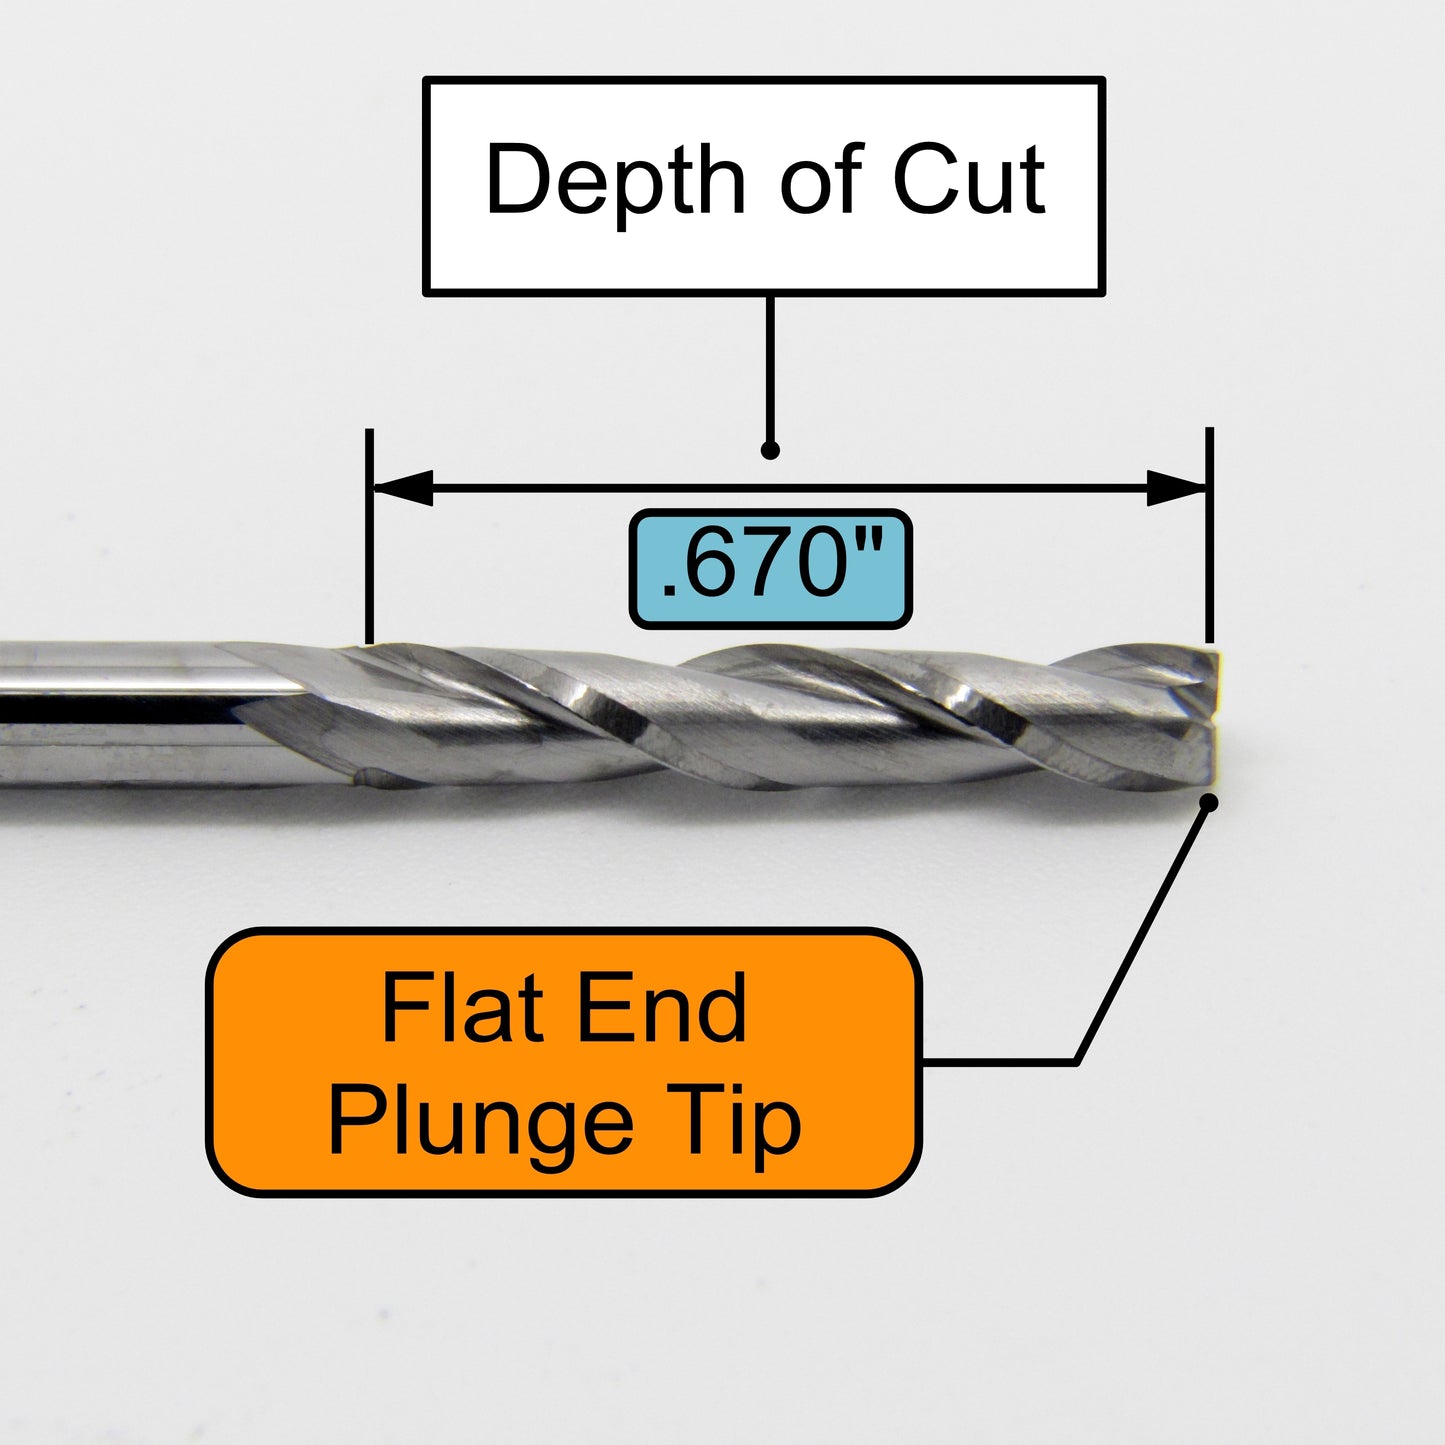 1/8" x .670" LOC Up Cut Extended Flute Length Two Flute Carbide End Mill M114